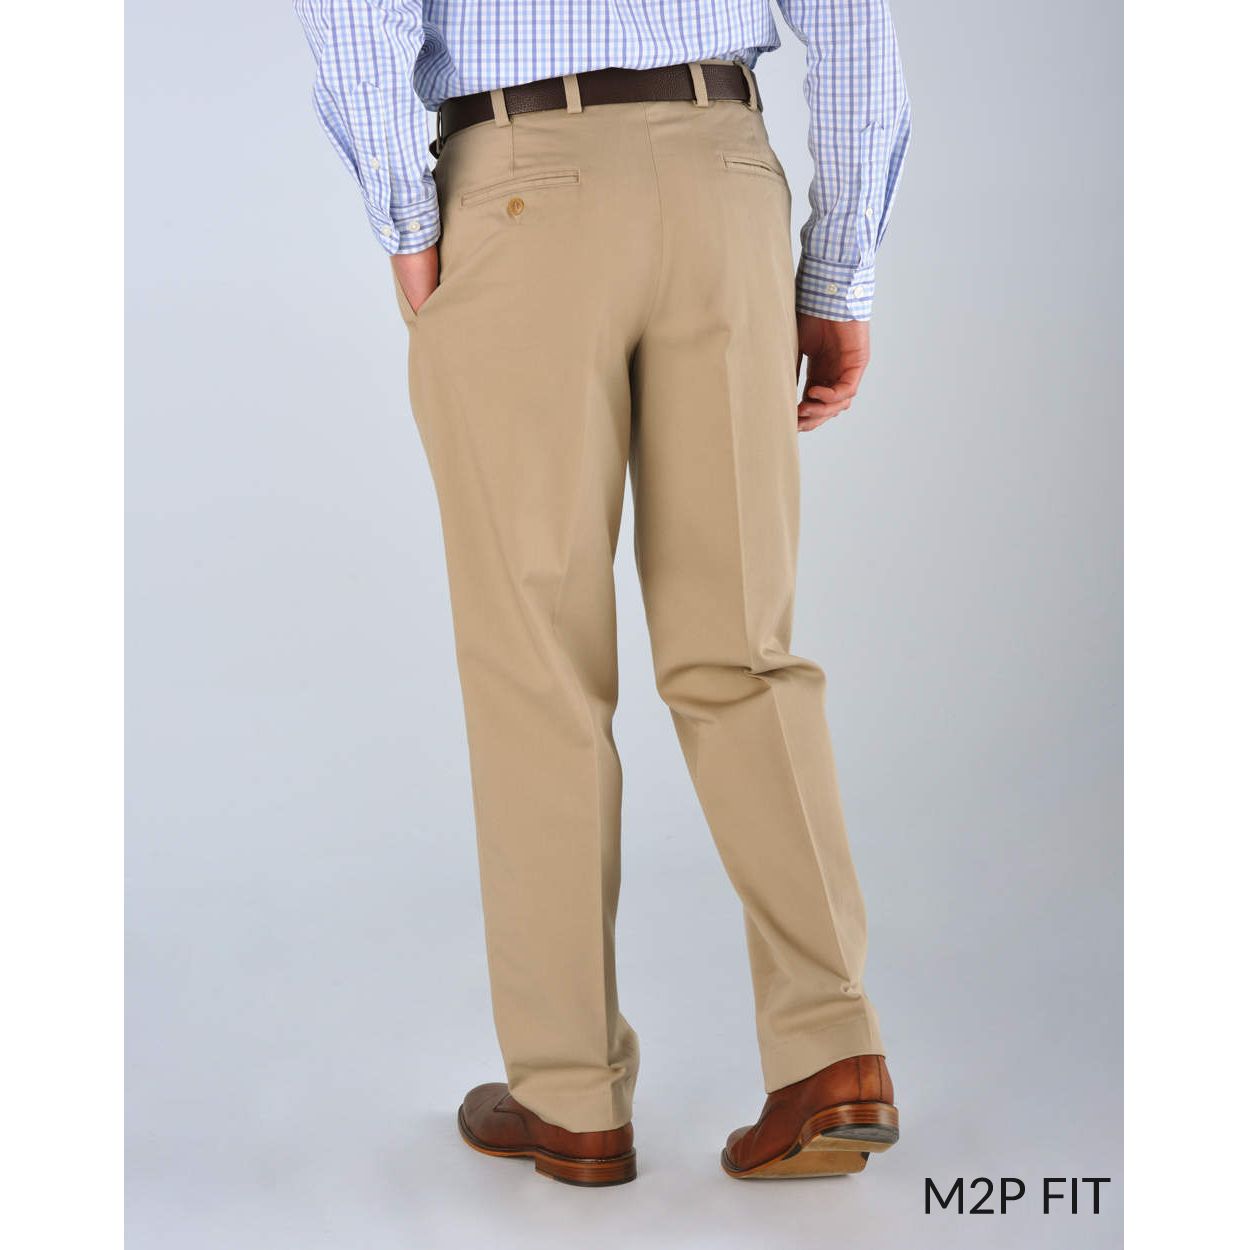 M2P Pleated Classic Fit Montgomery Stretch Twills in Navy by Bills Khakis